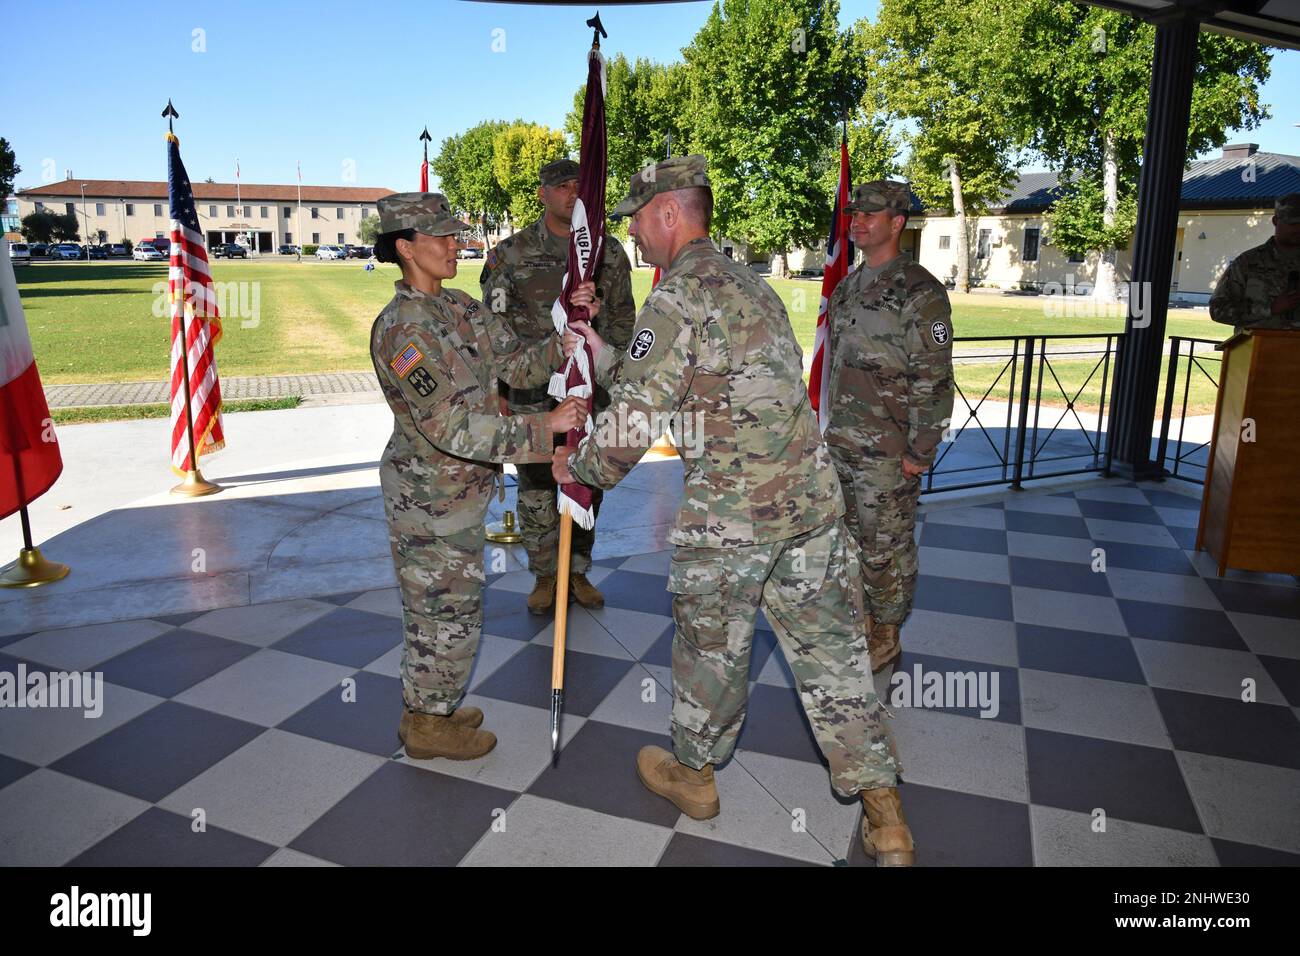 U.S. Army Lt. Col. Serena T. Mukai, the incoming Commander, receives the unit colors from Col. Kenneth D. Spicer, the commander of Public Health Command Europe during the Change of Command ceremony at Caserma Ederle in Vicenza, Italy, August 3, 2022. Stock Photo